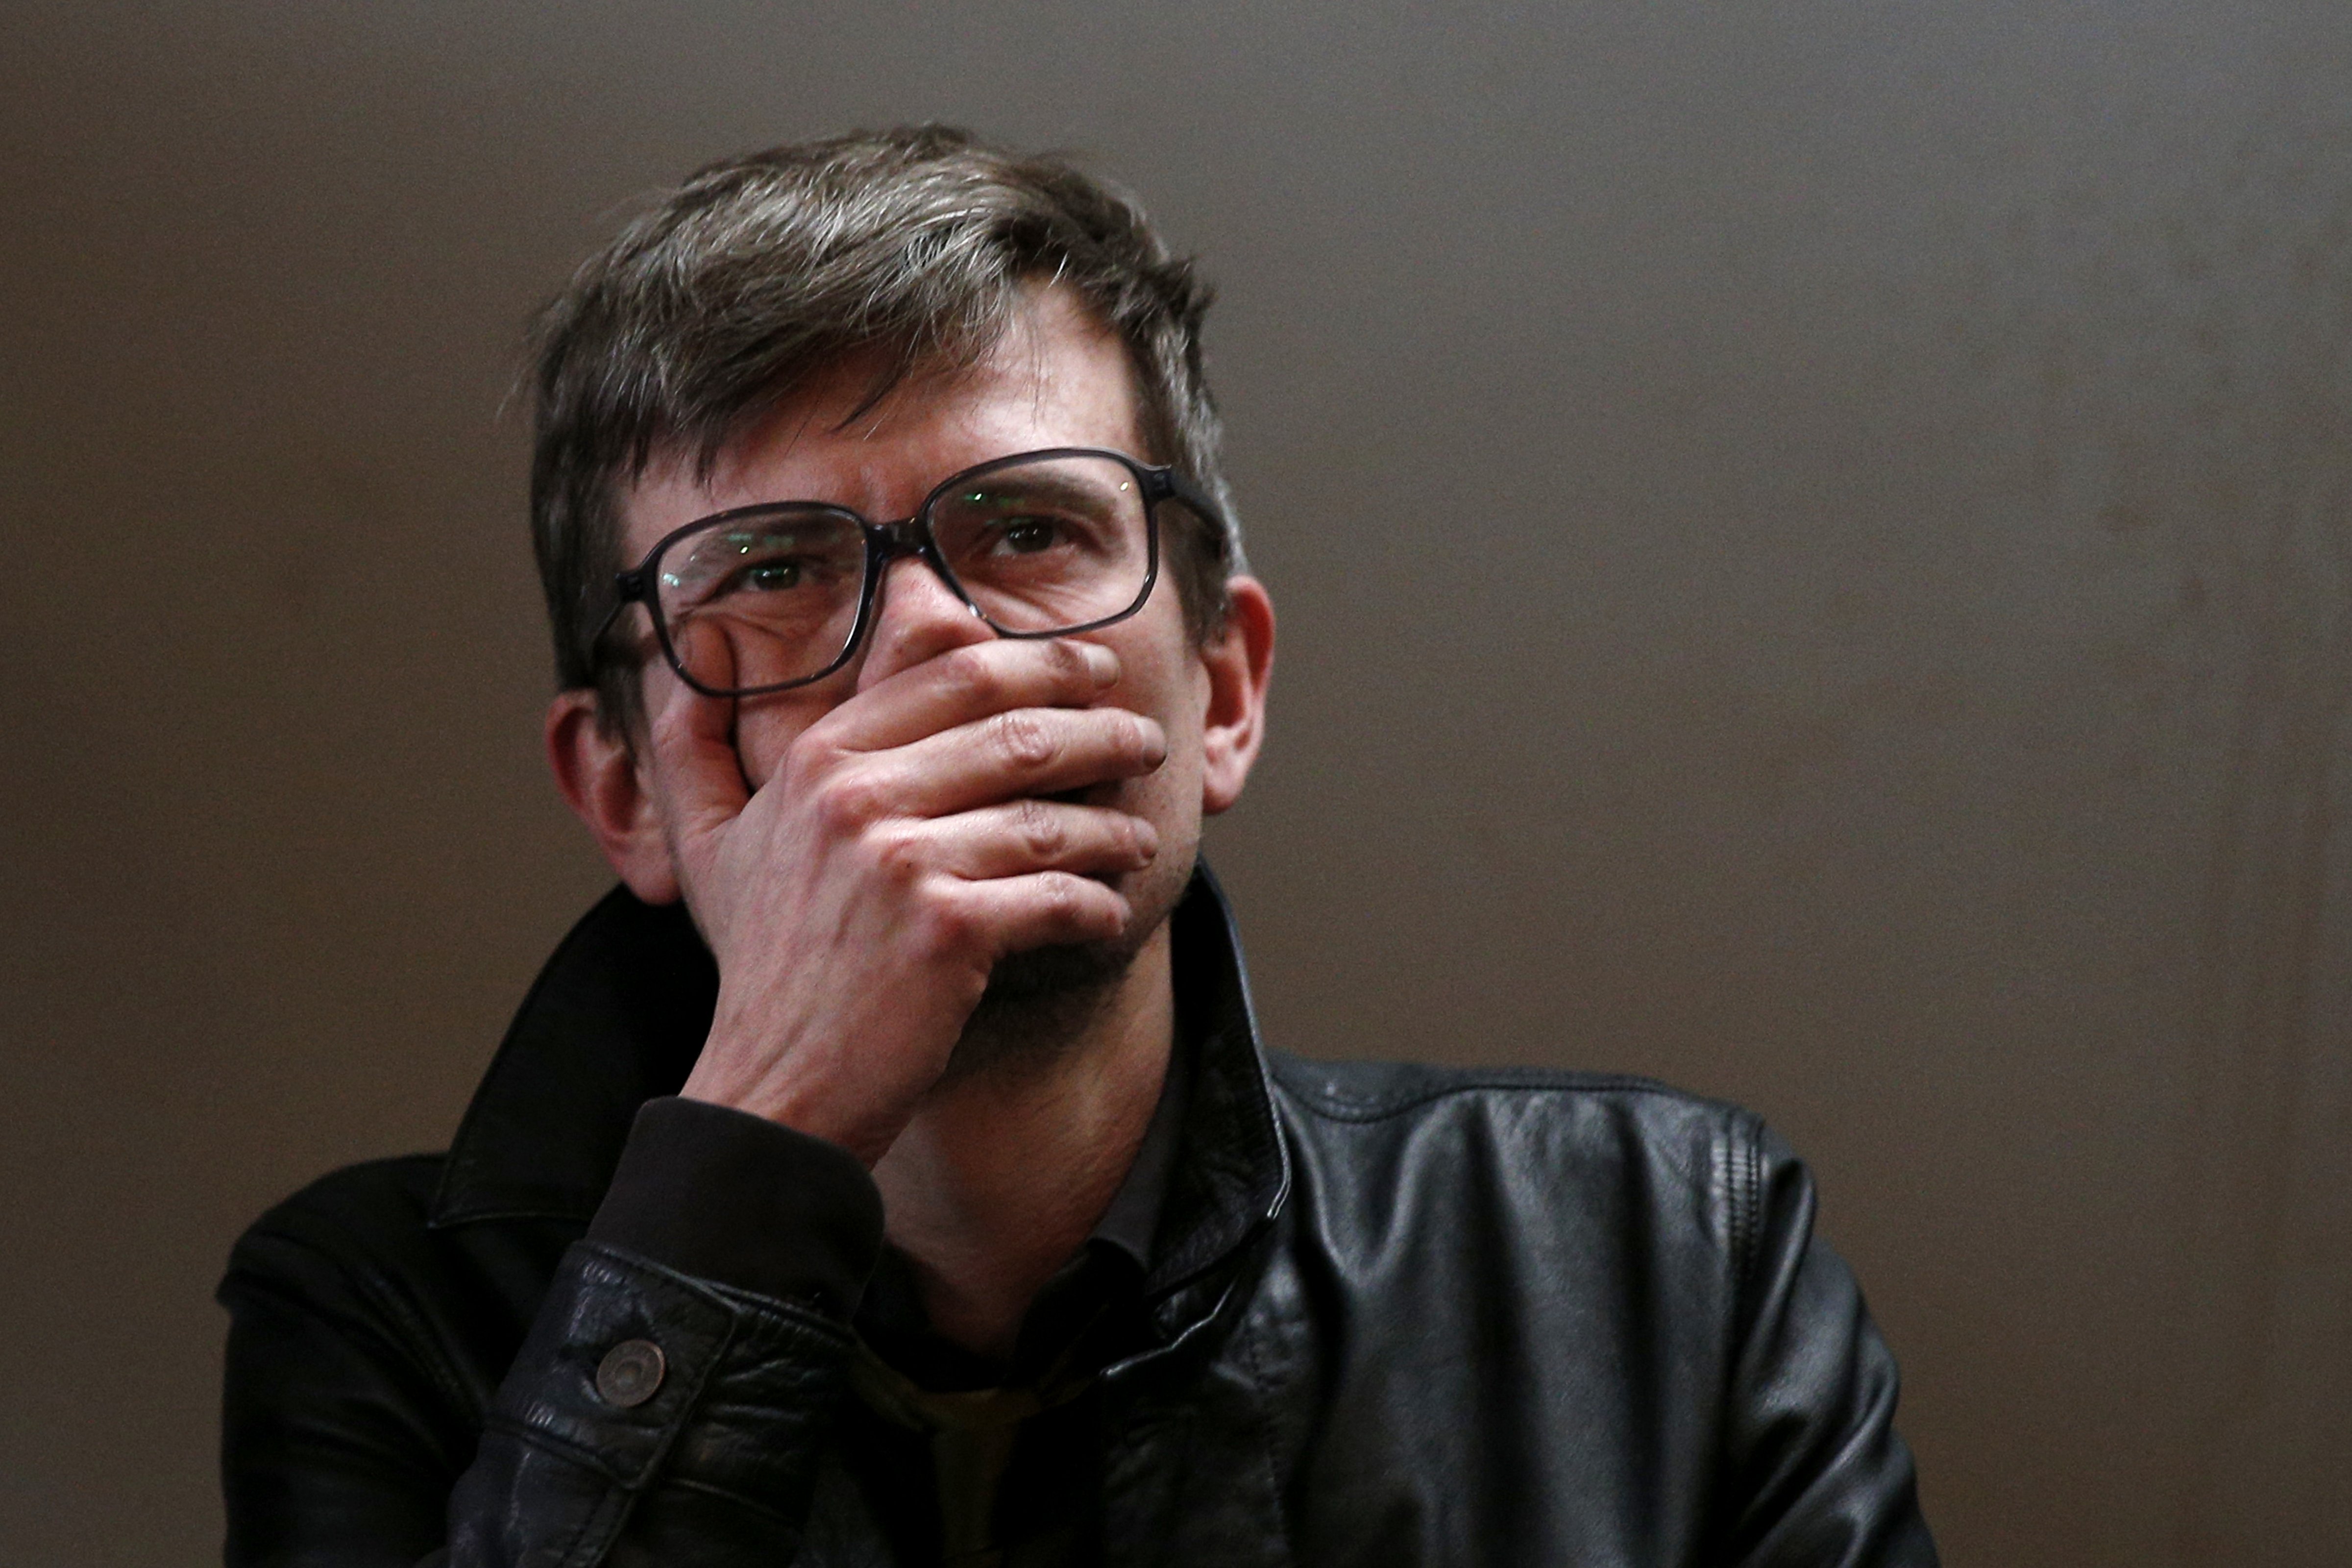 Charlie Hebdo caricaturist Rénald Luzier reacts during a press conference about the next Charlie Hebdo edition in Paris, France, 13 January 2015.